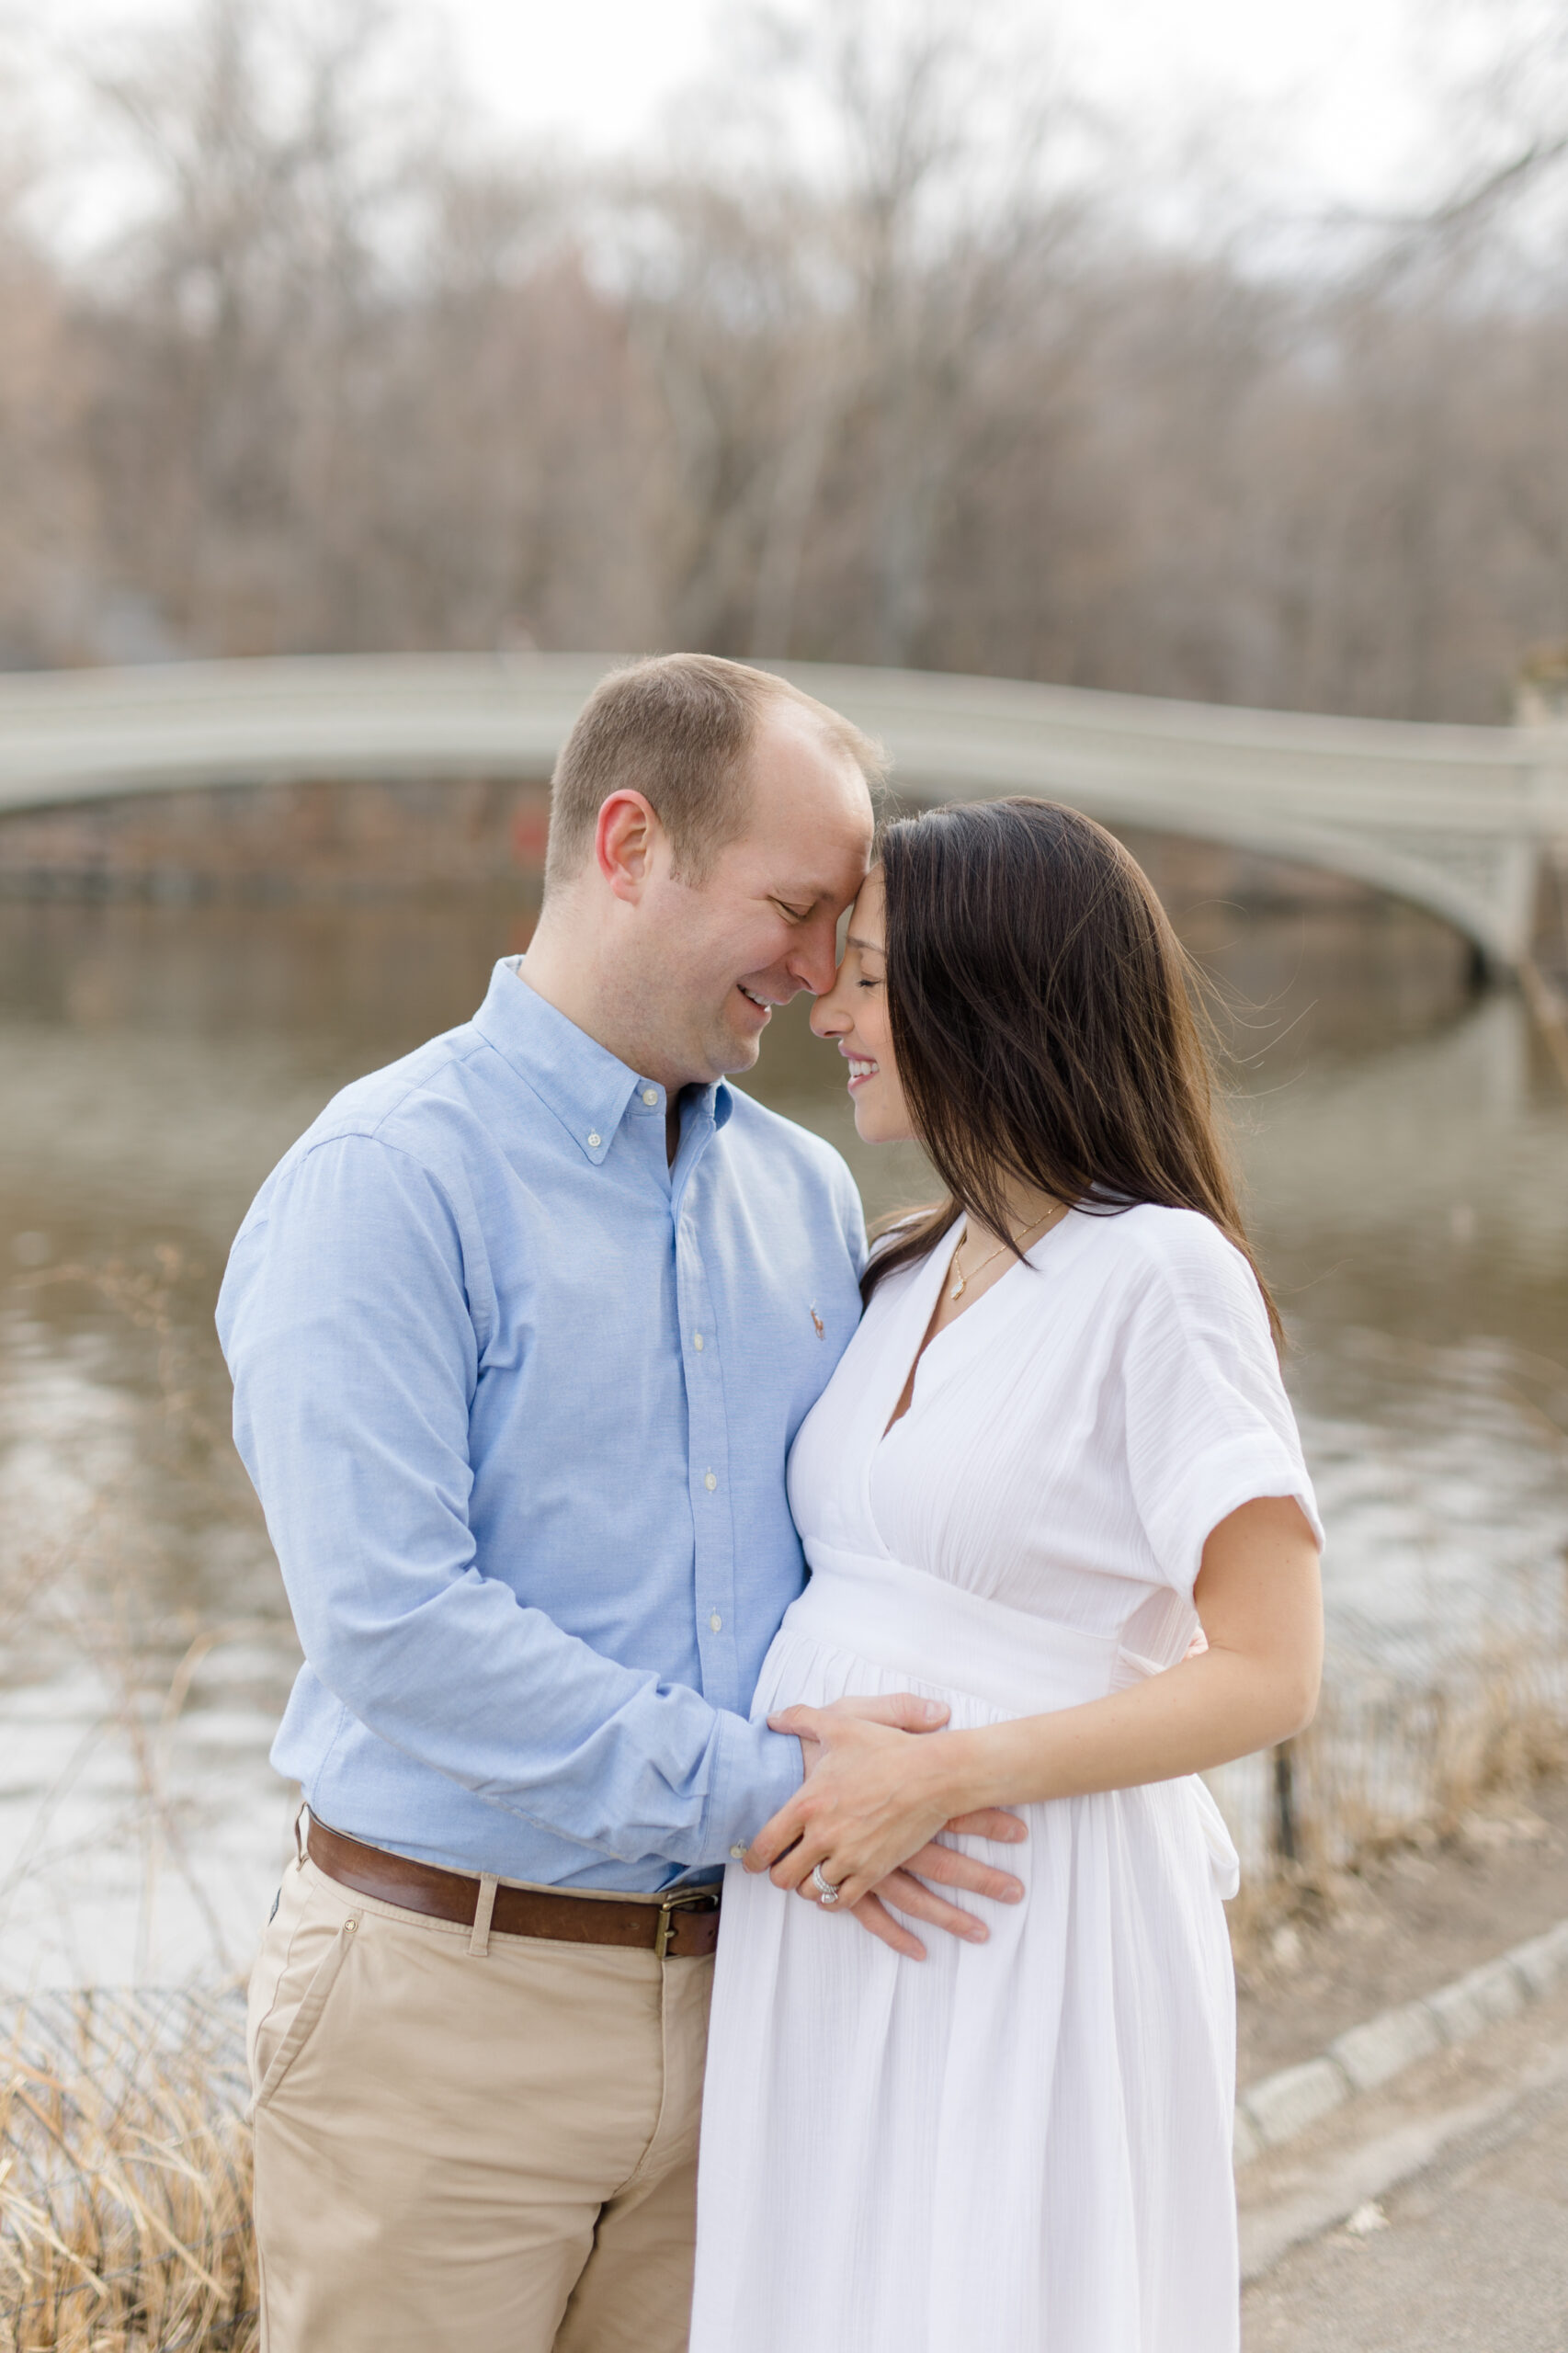 An expecting couple together in front of Bow Bridge in Central Park during a New York City maternity photography session with Jacqueline Clair Photography